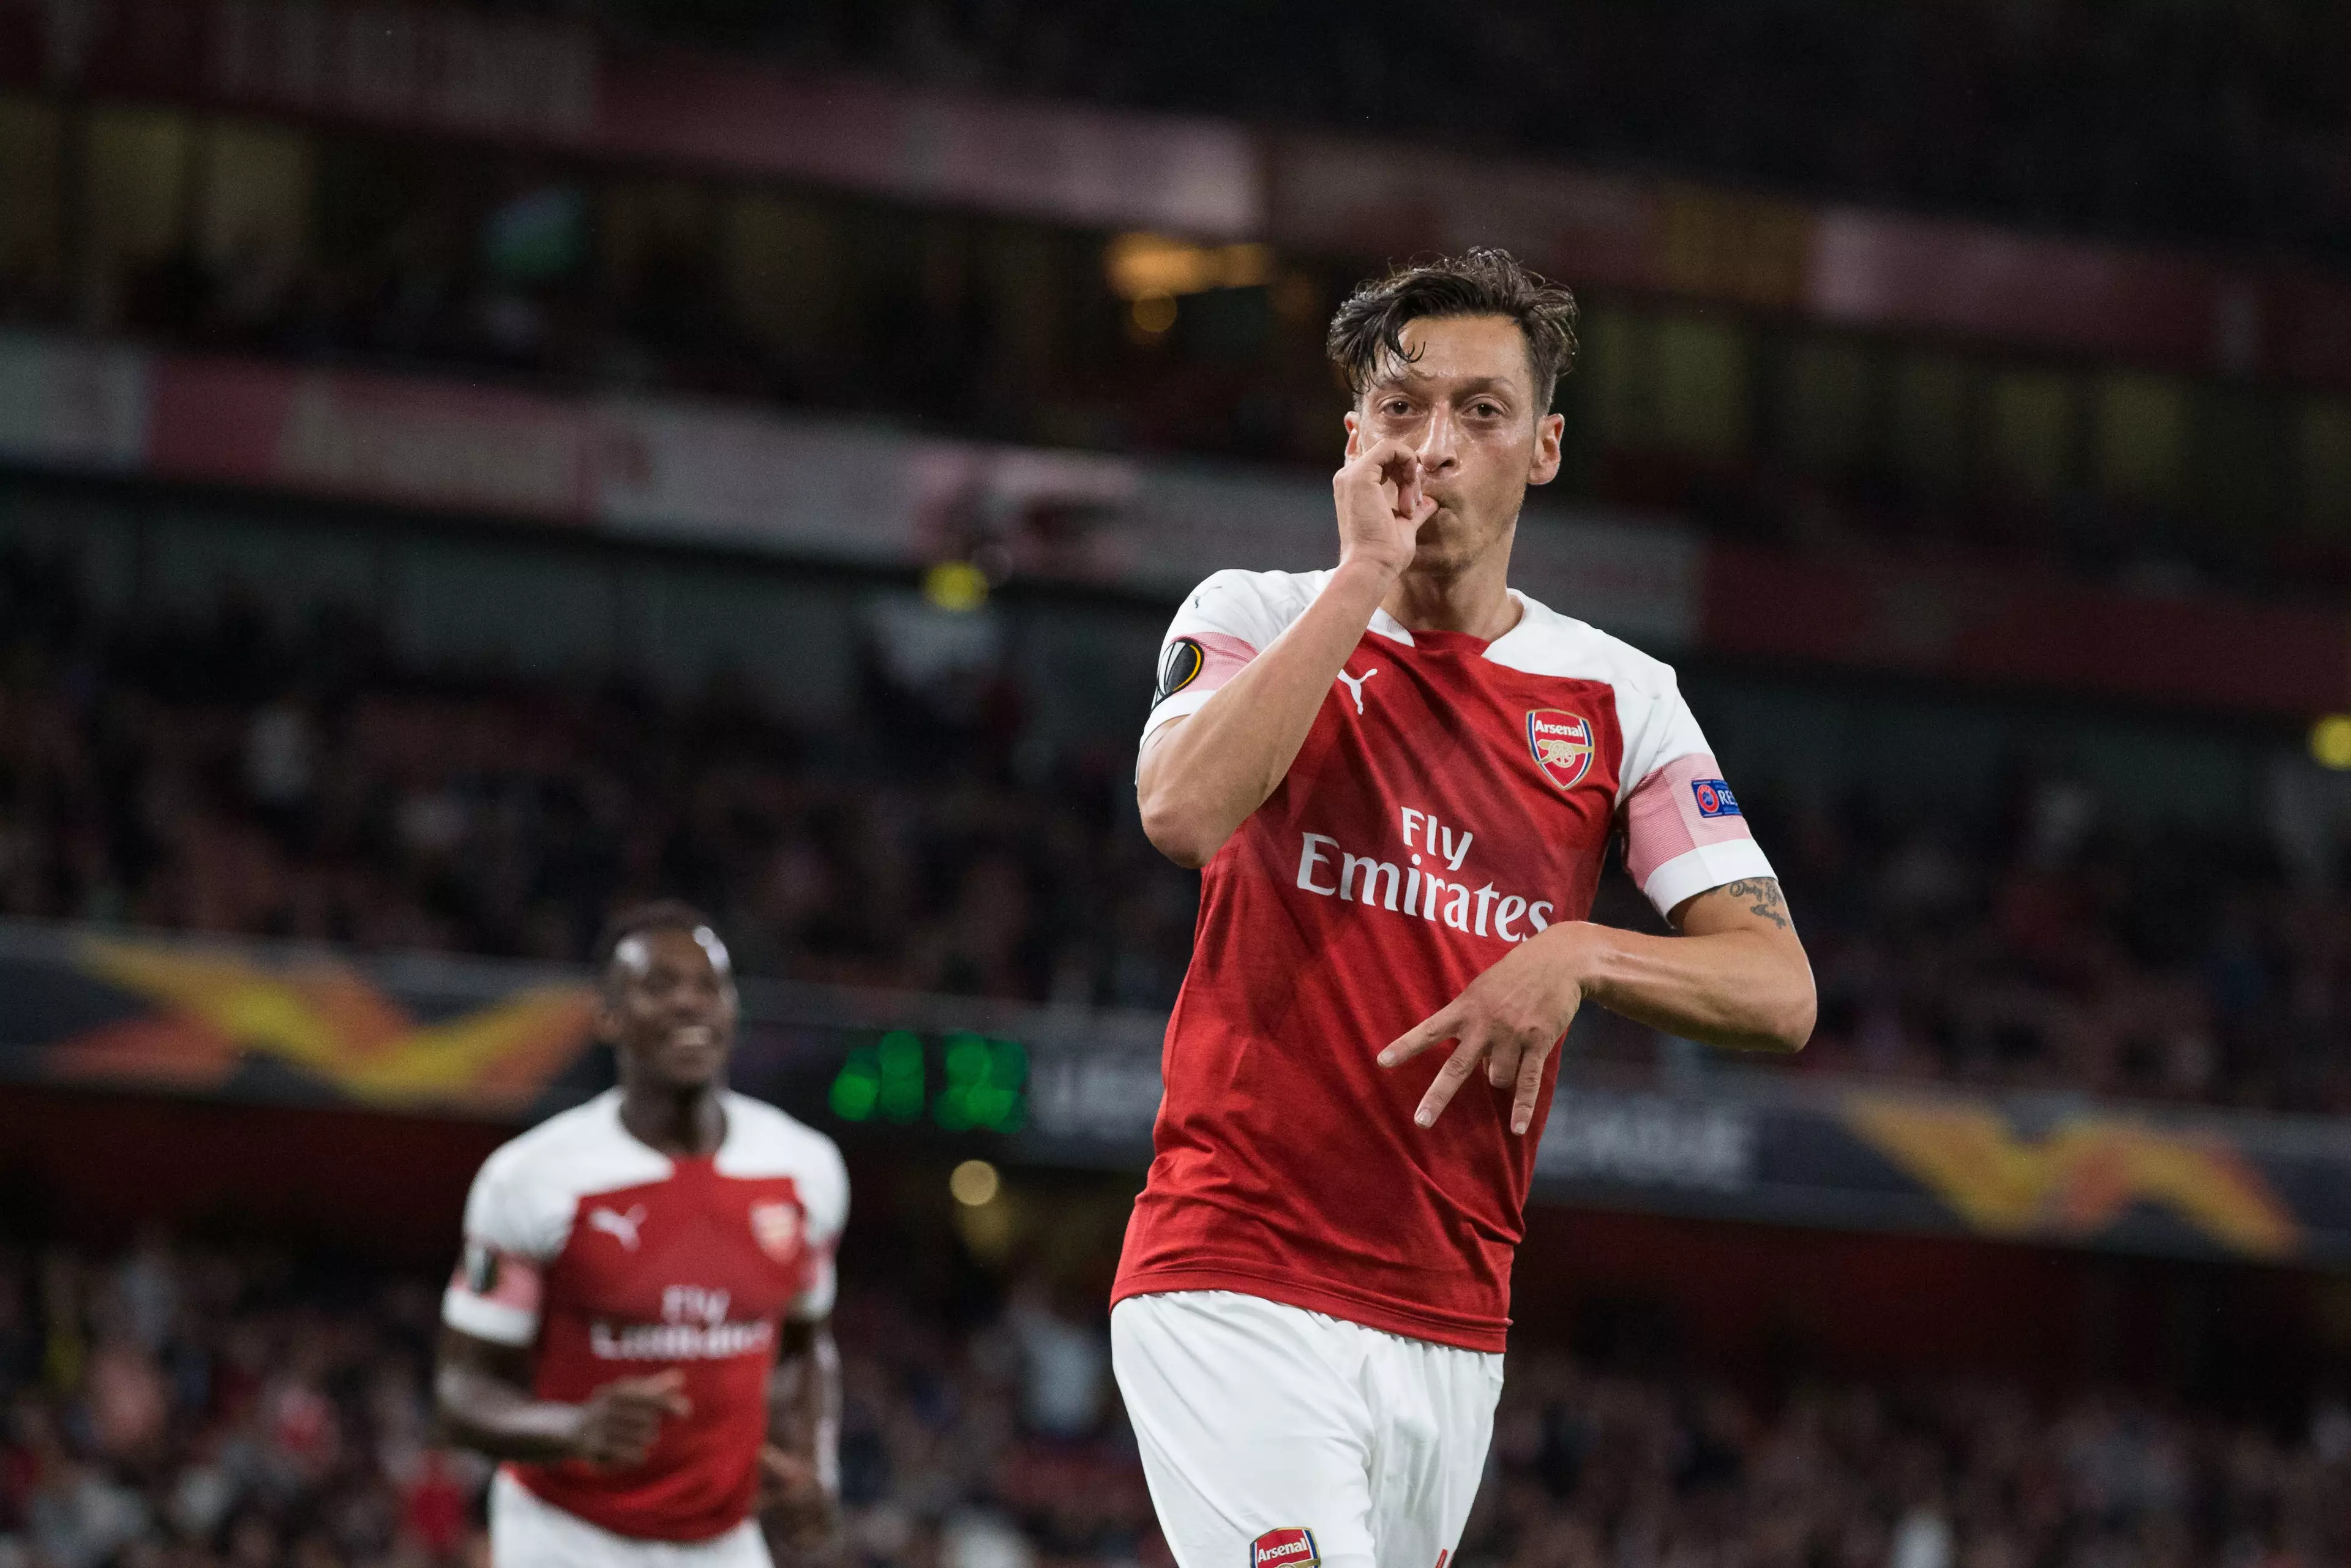 Ozil has fallen out of favour at the Emirates. Image: PA Images